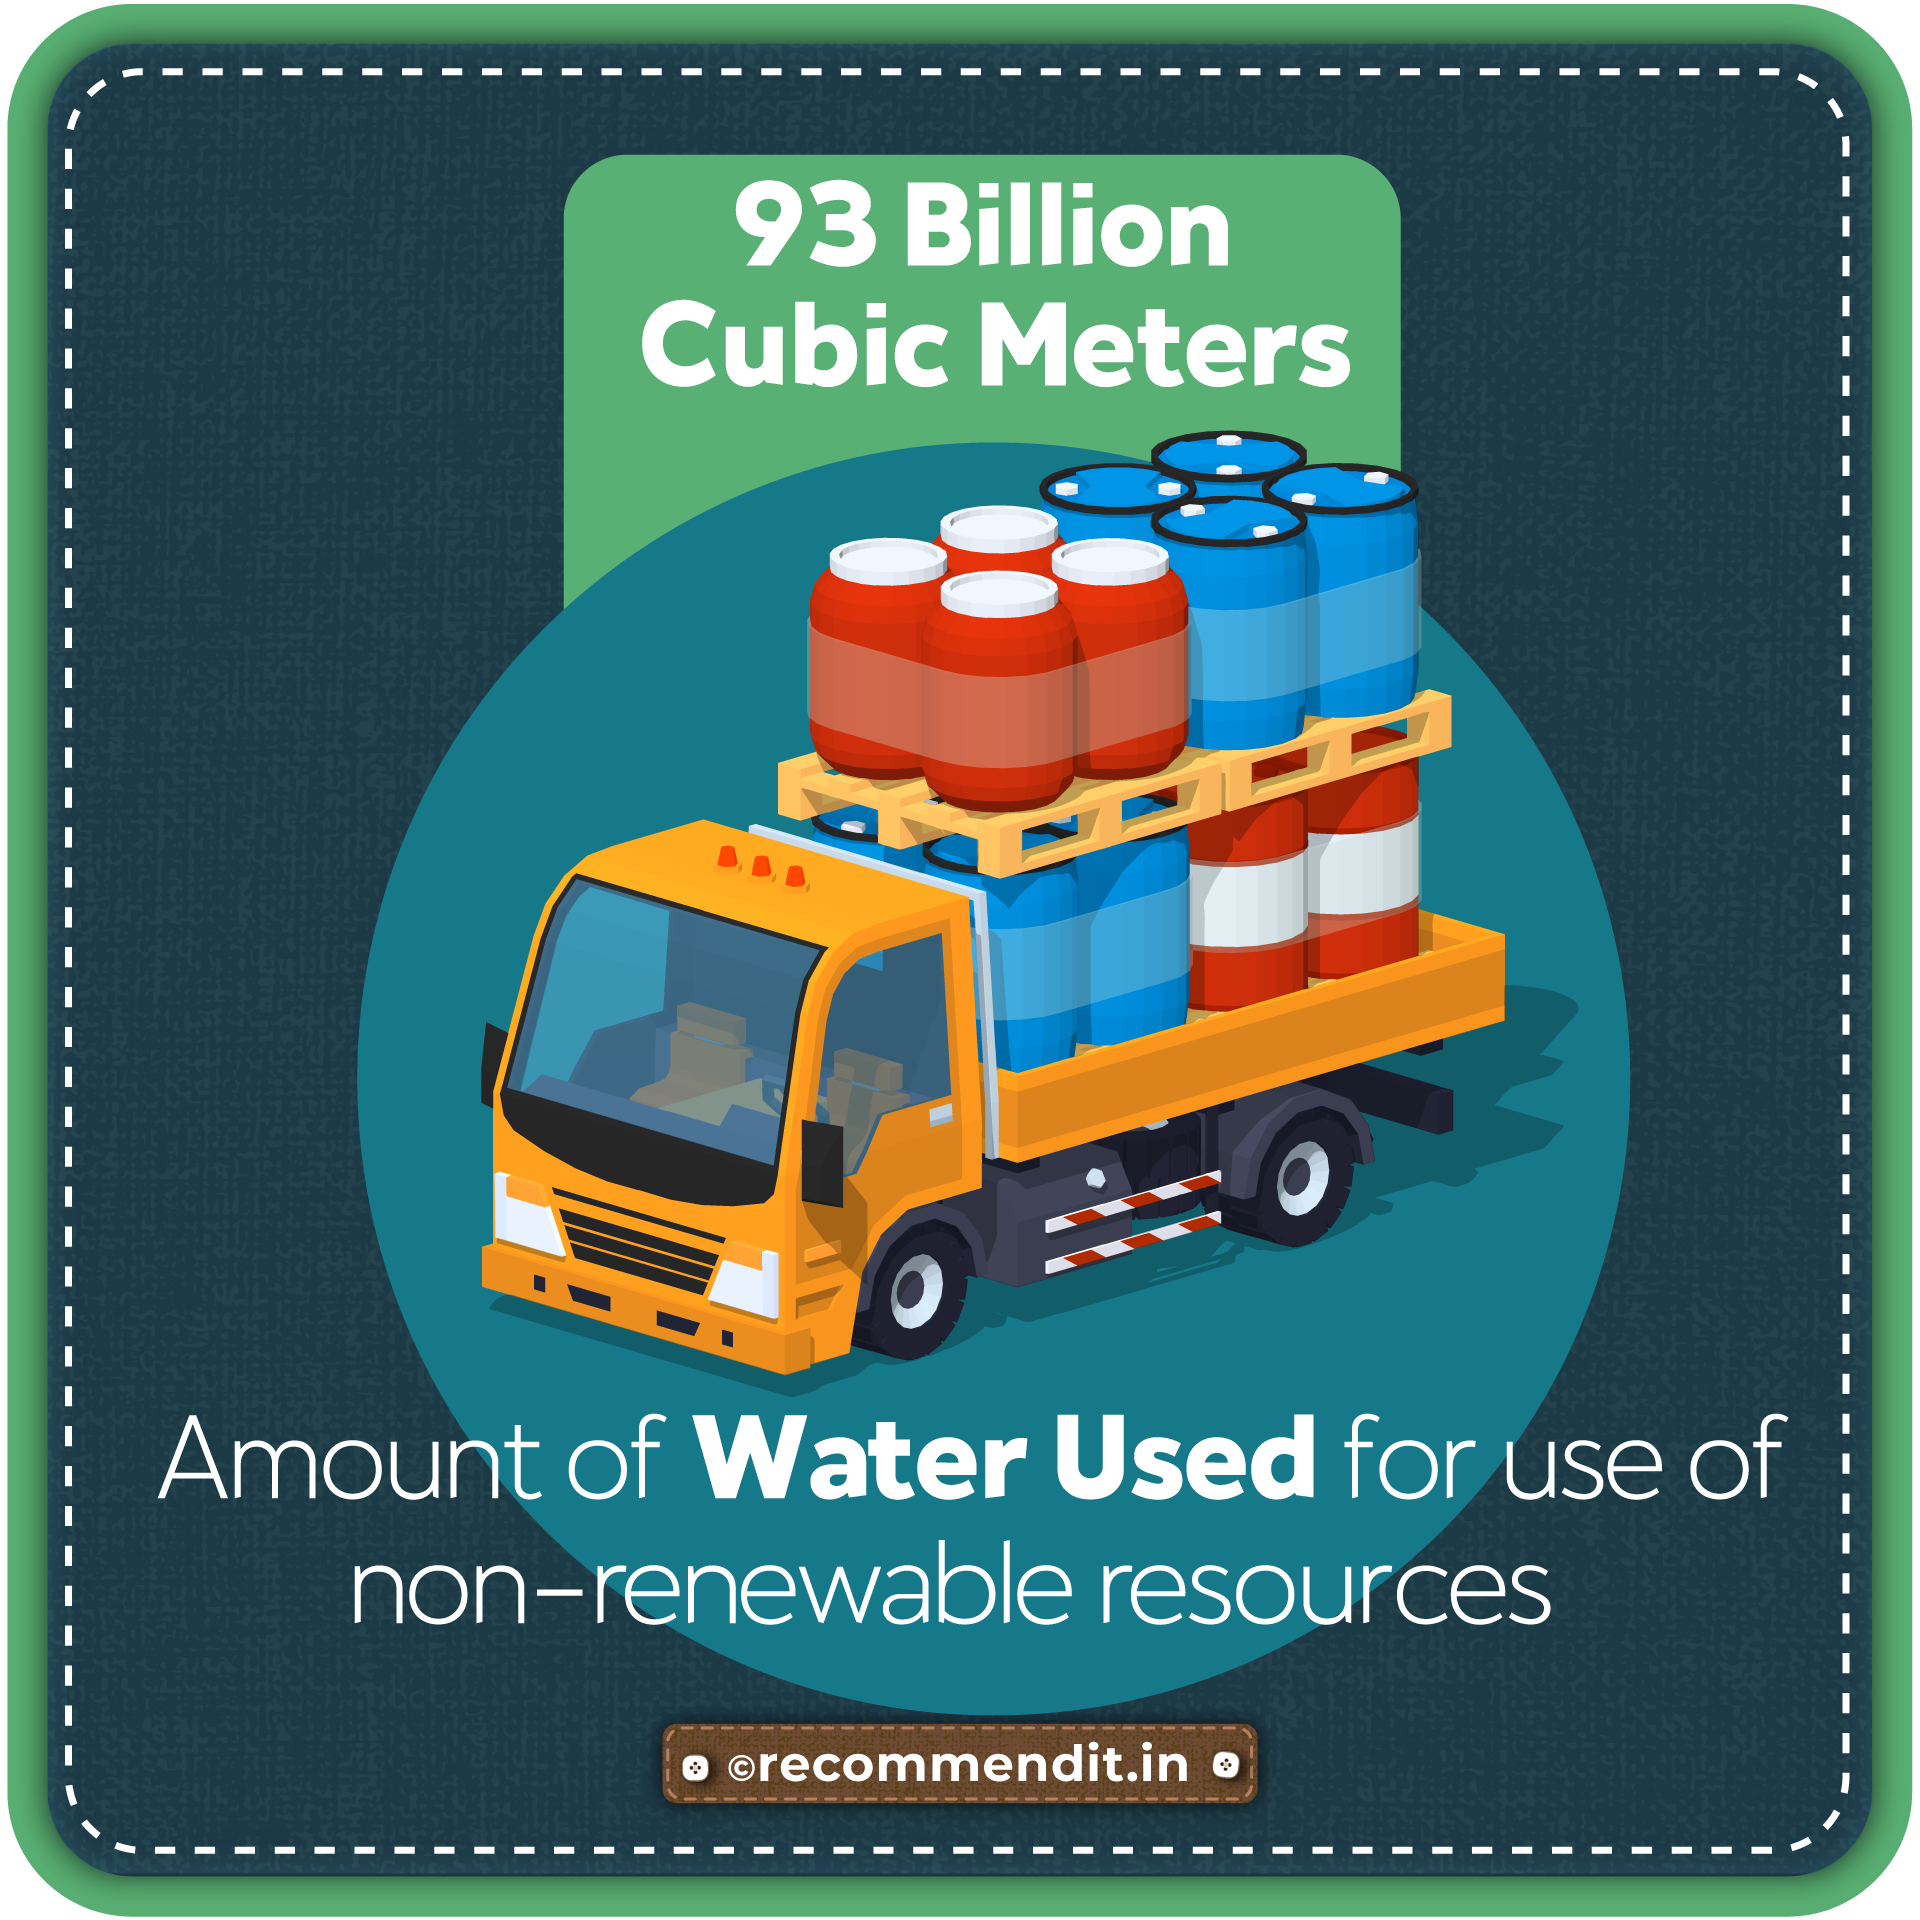 Amount of water used